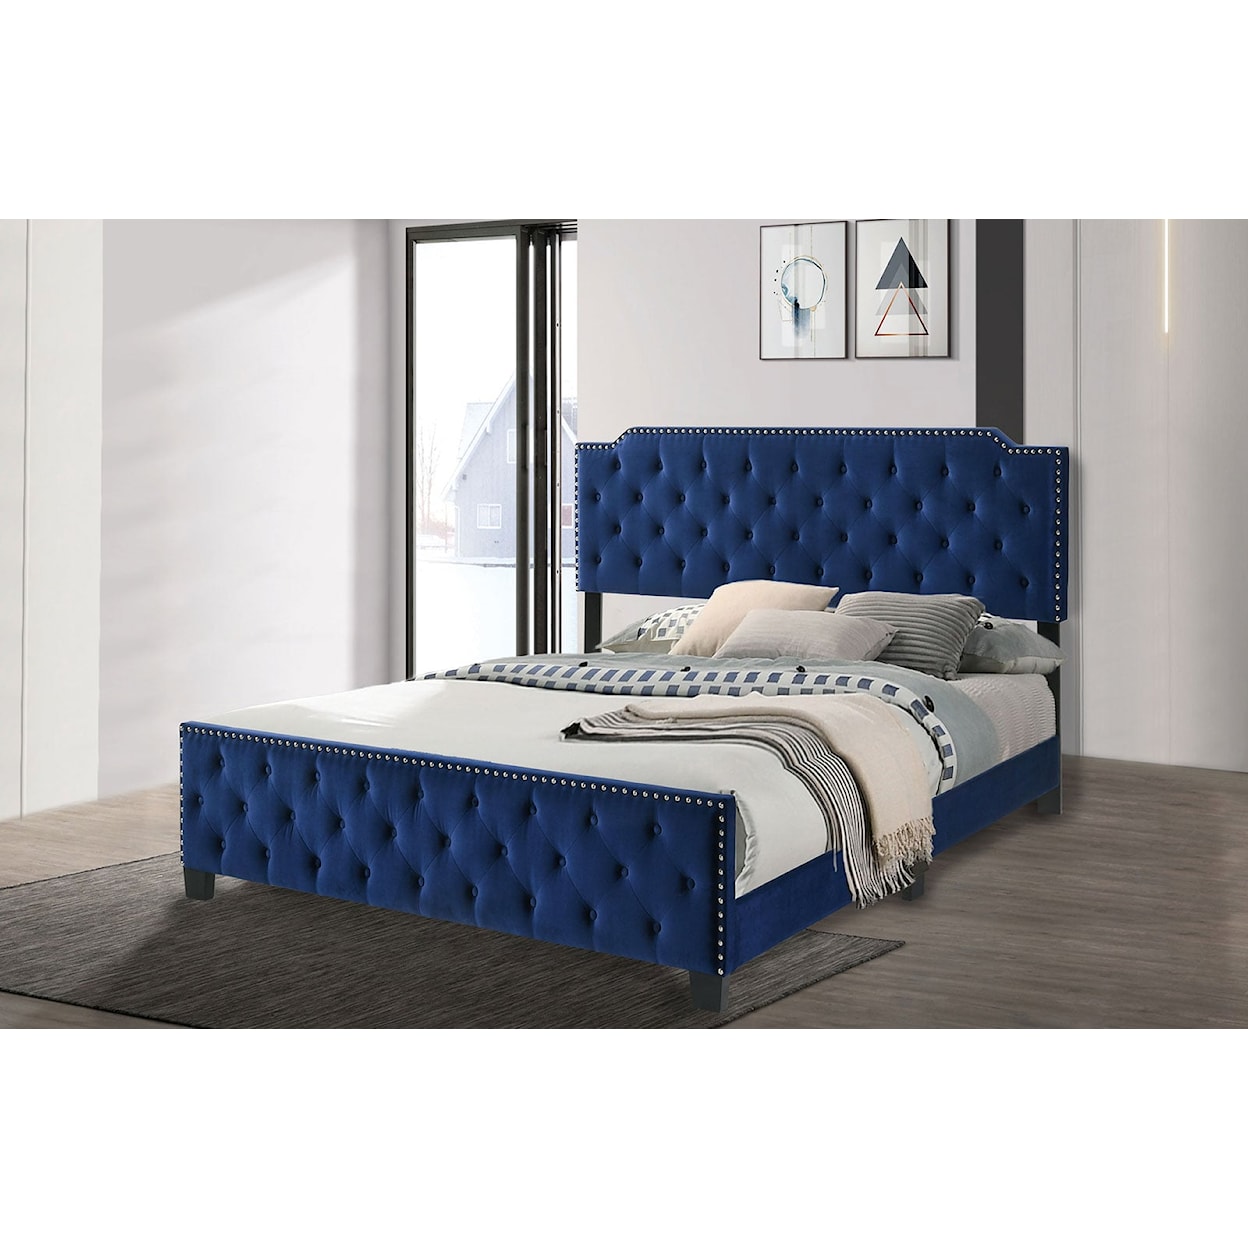 Furniture of America Charlize King Bed